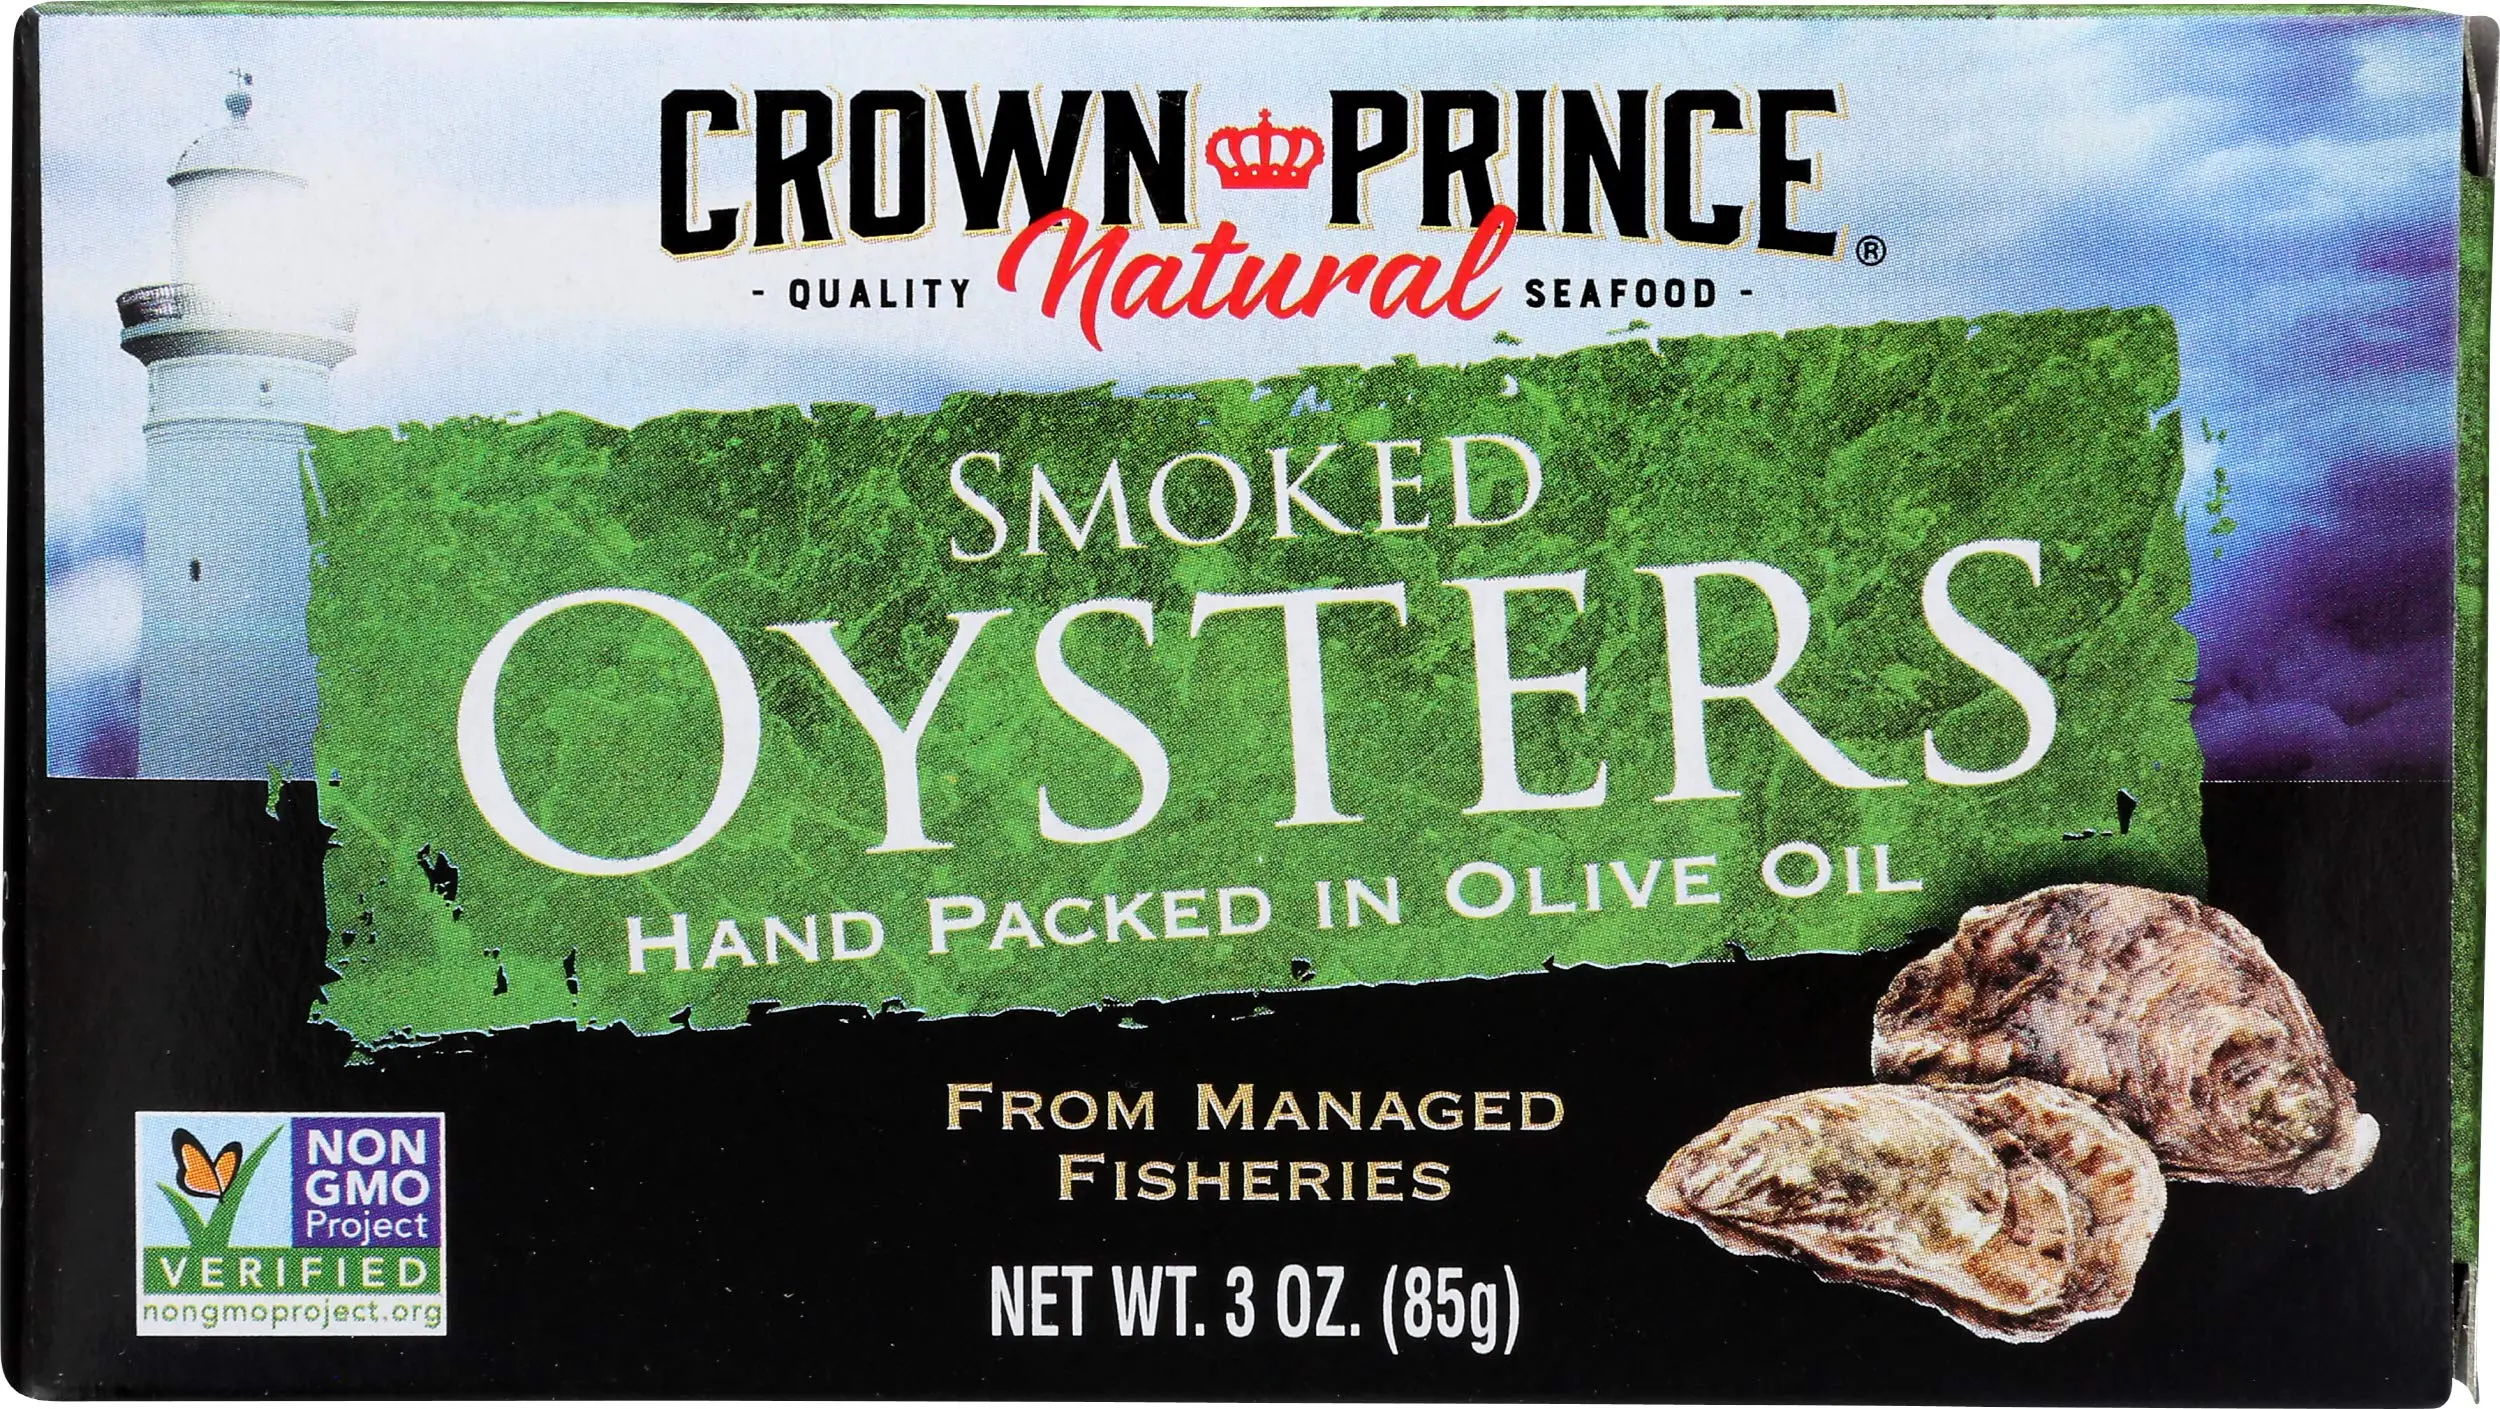 crown prince natural smoked oysters - Are Crown Prince oysters fully cooked